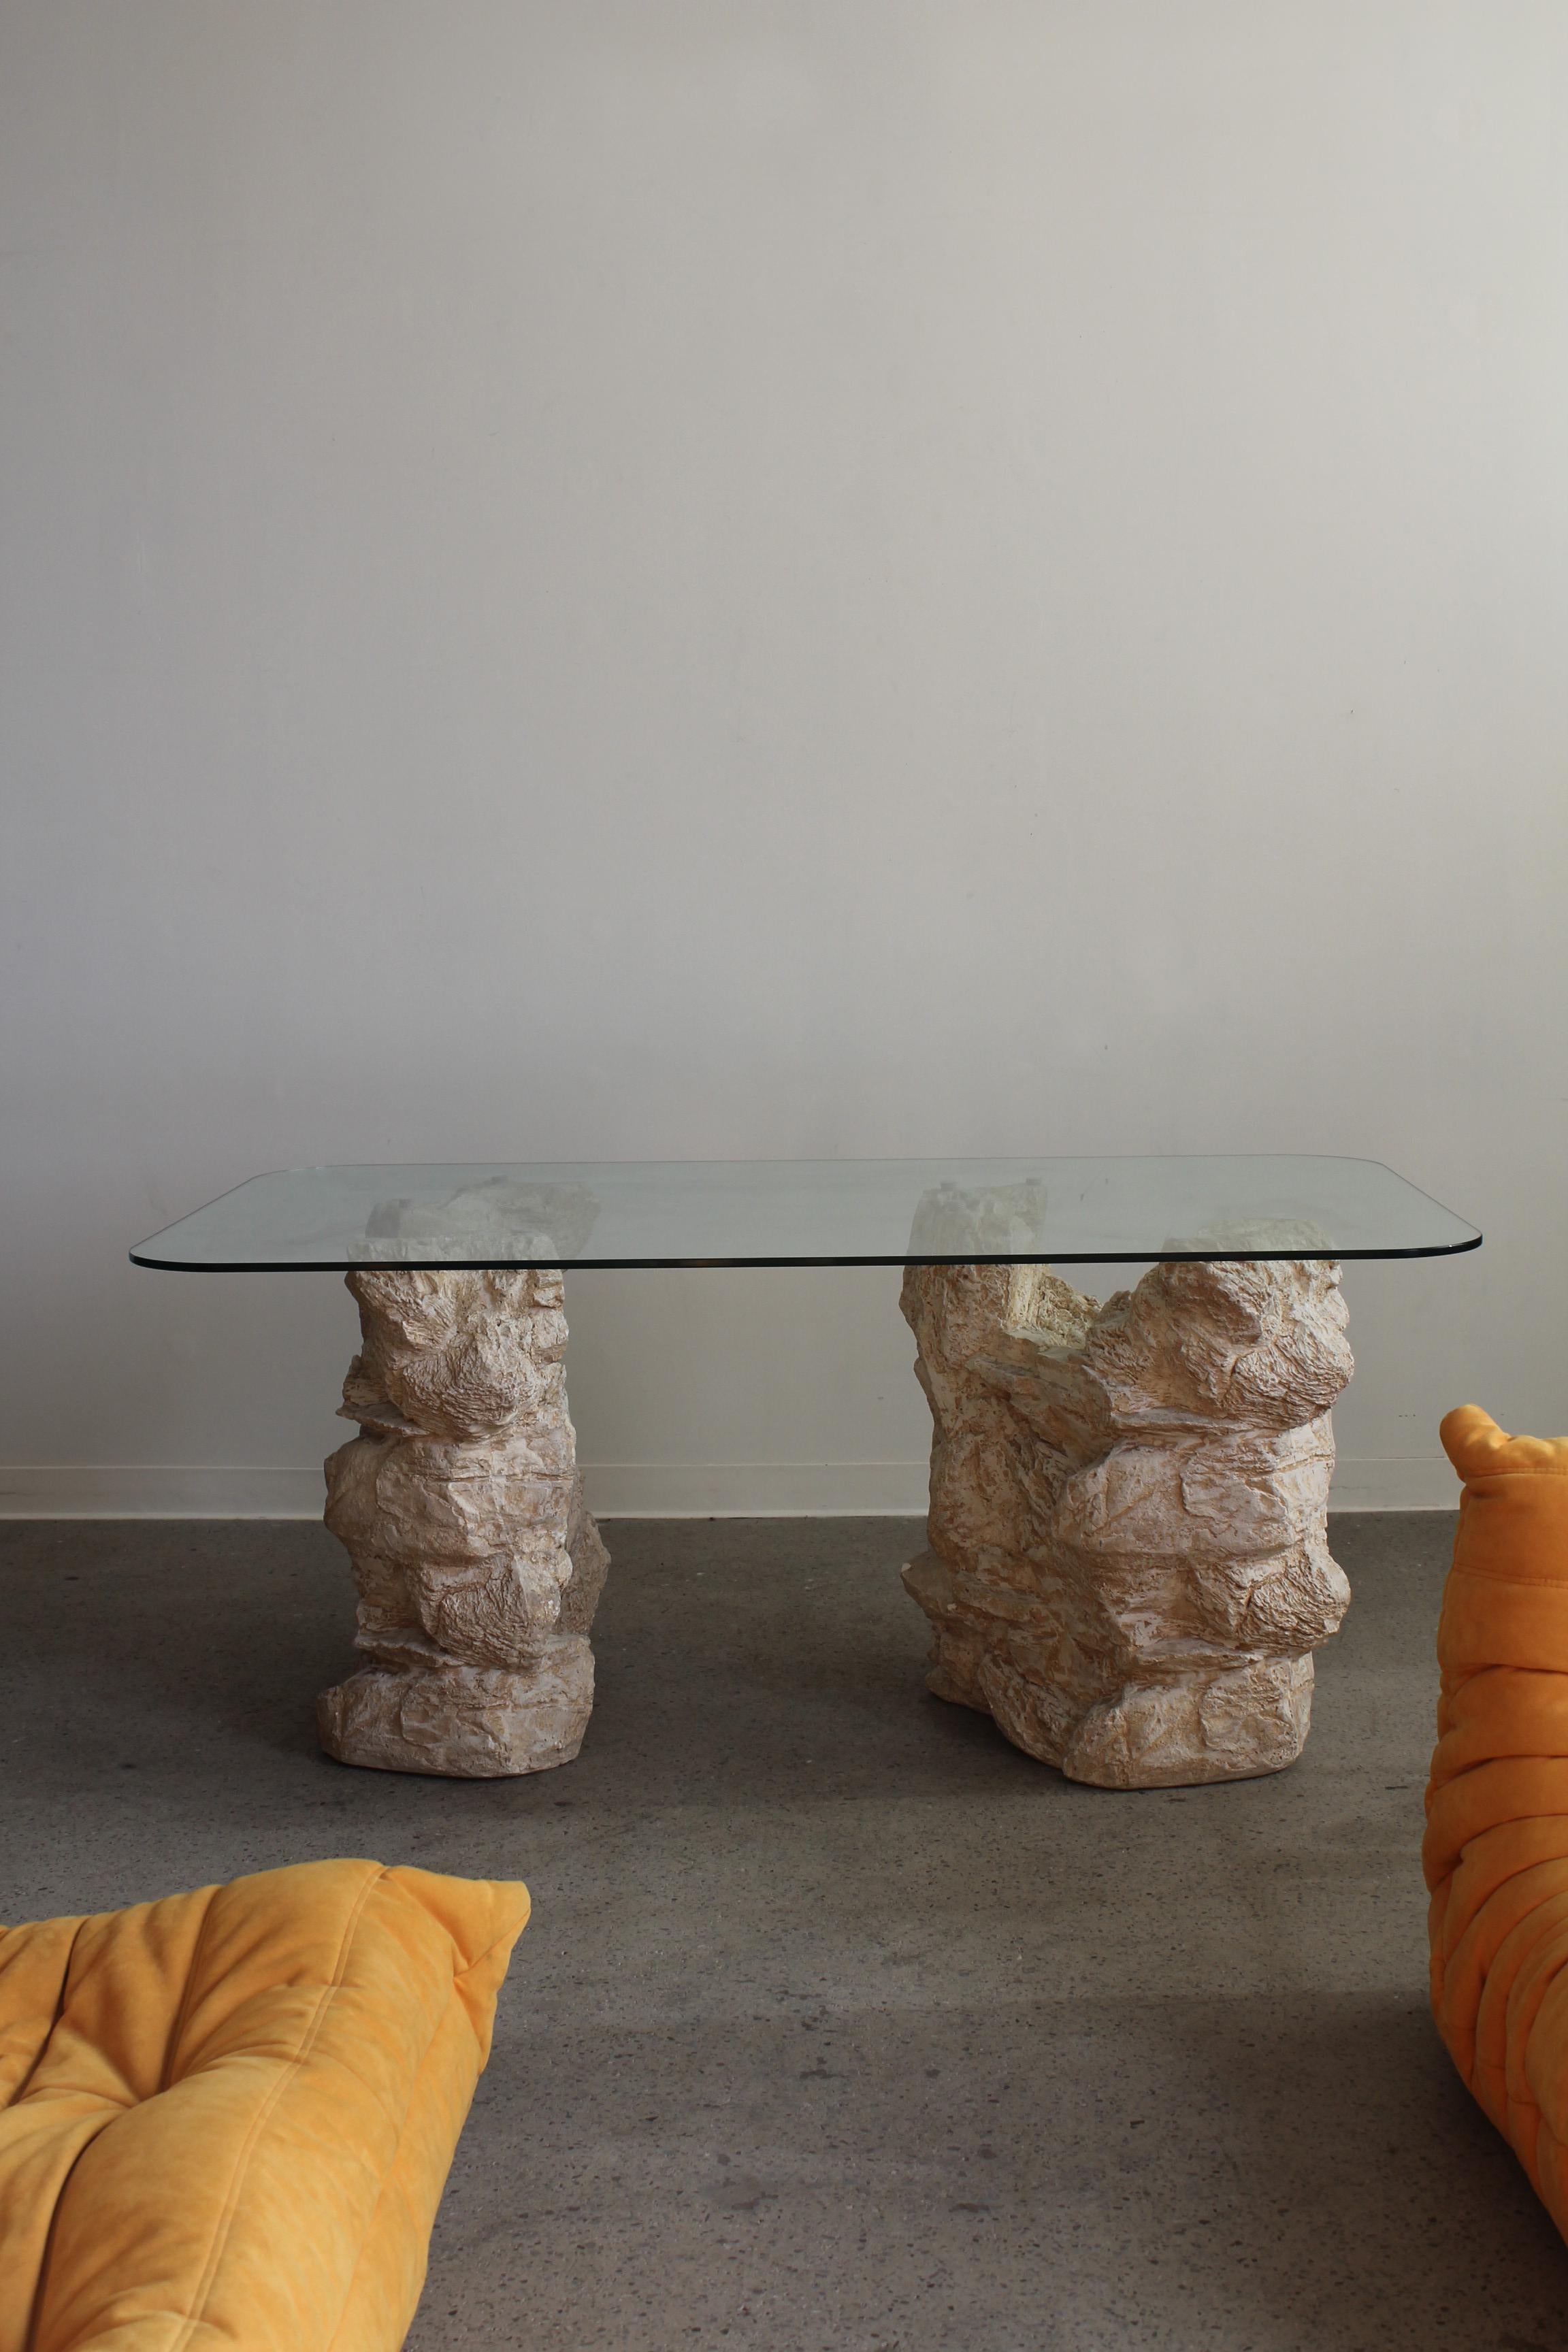 Glass Dining Table with sculptural bases, 1990s. Two painted plaster bases with a rounded corner rectangular glass top. Bases can be placed as pleased.

Dimensions: 71.75